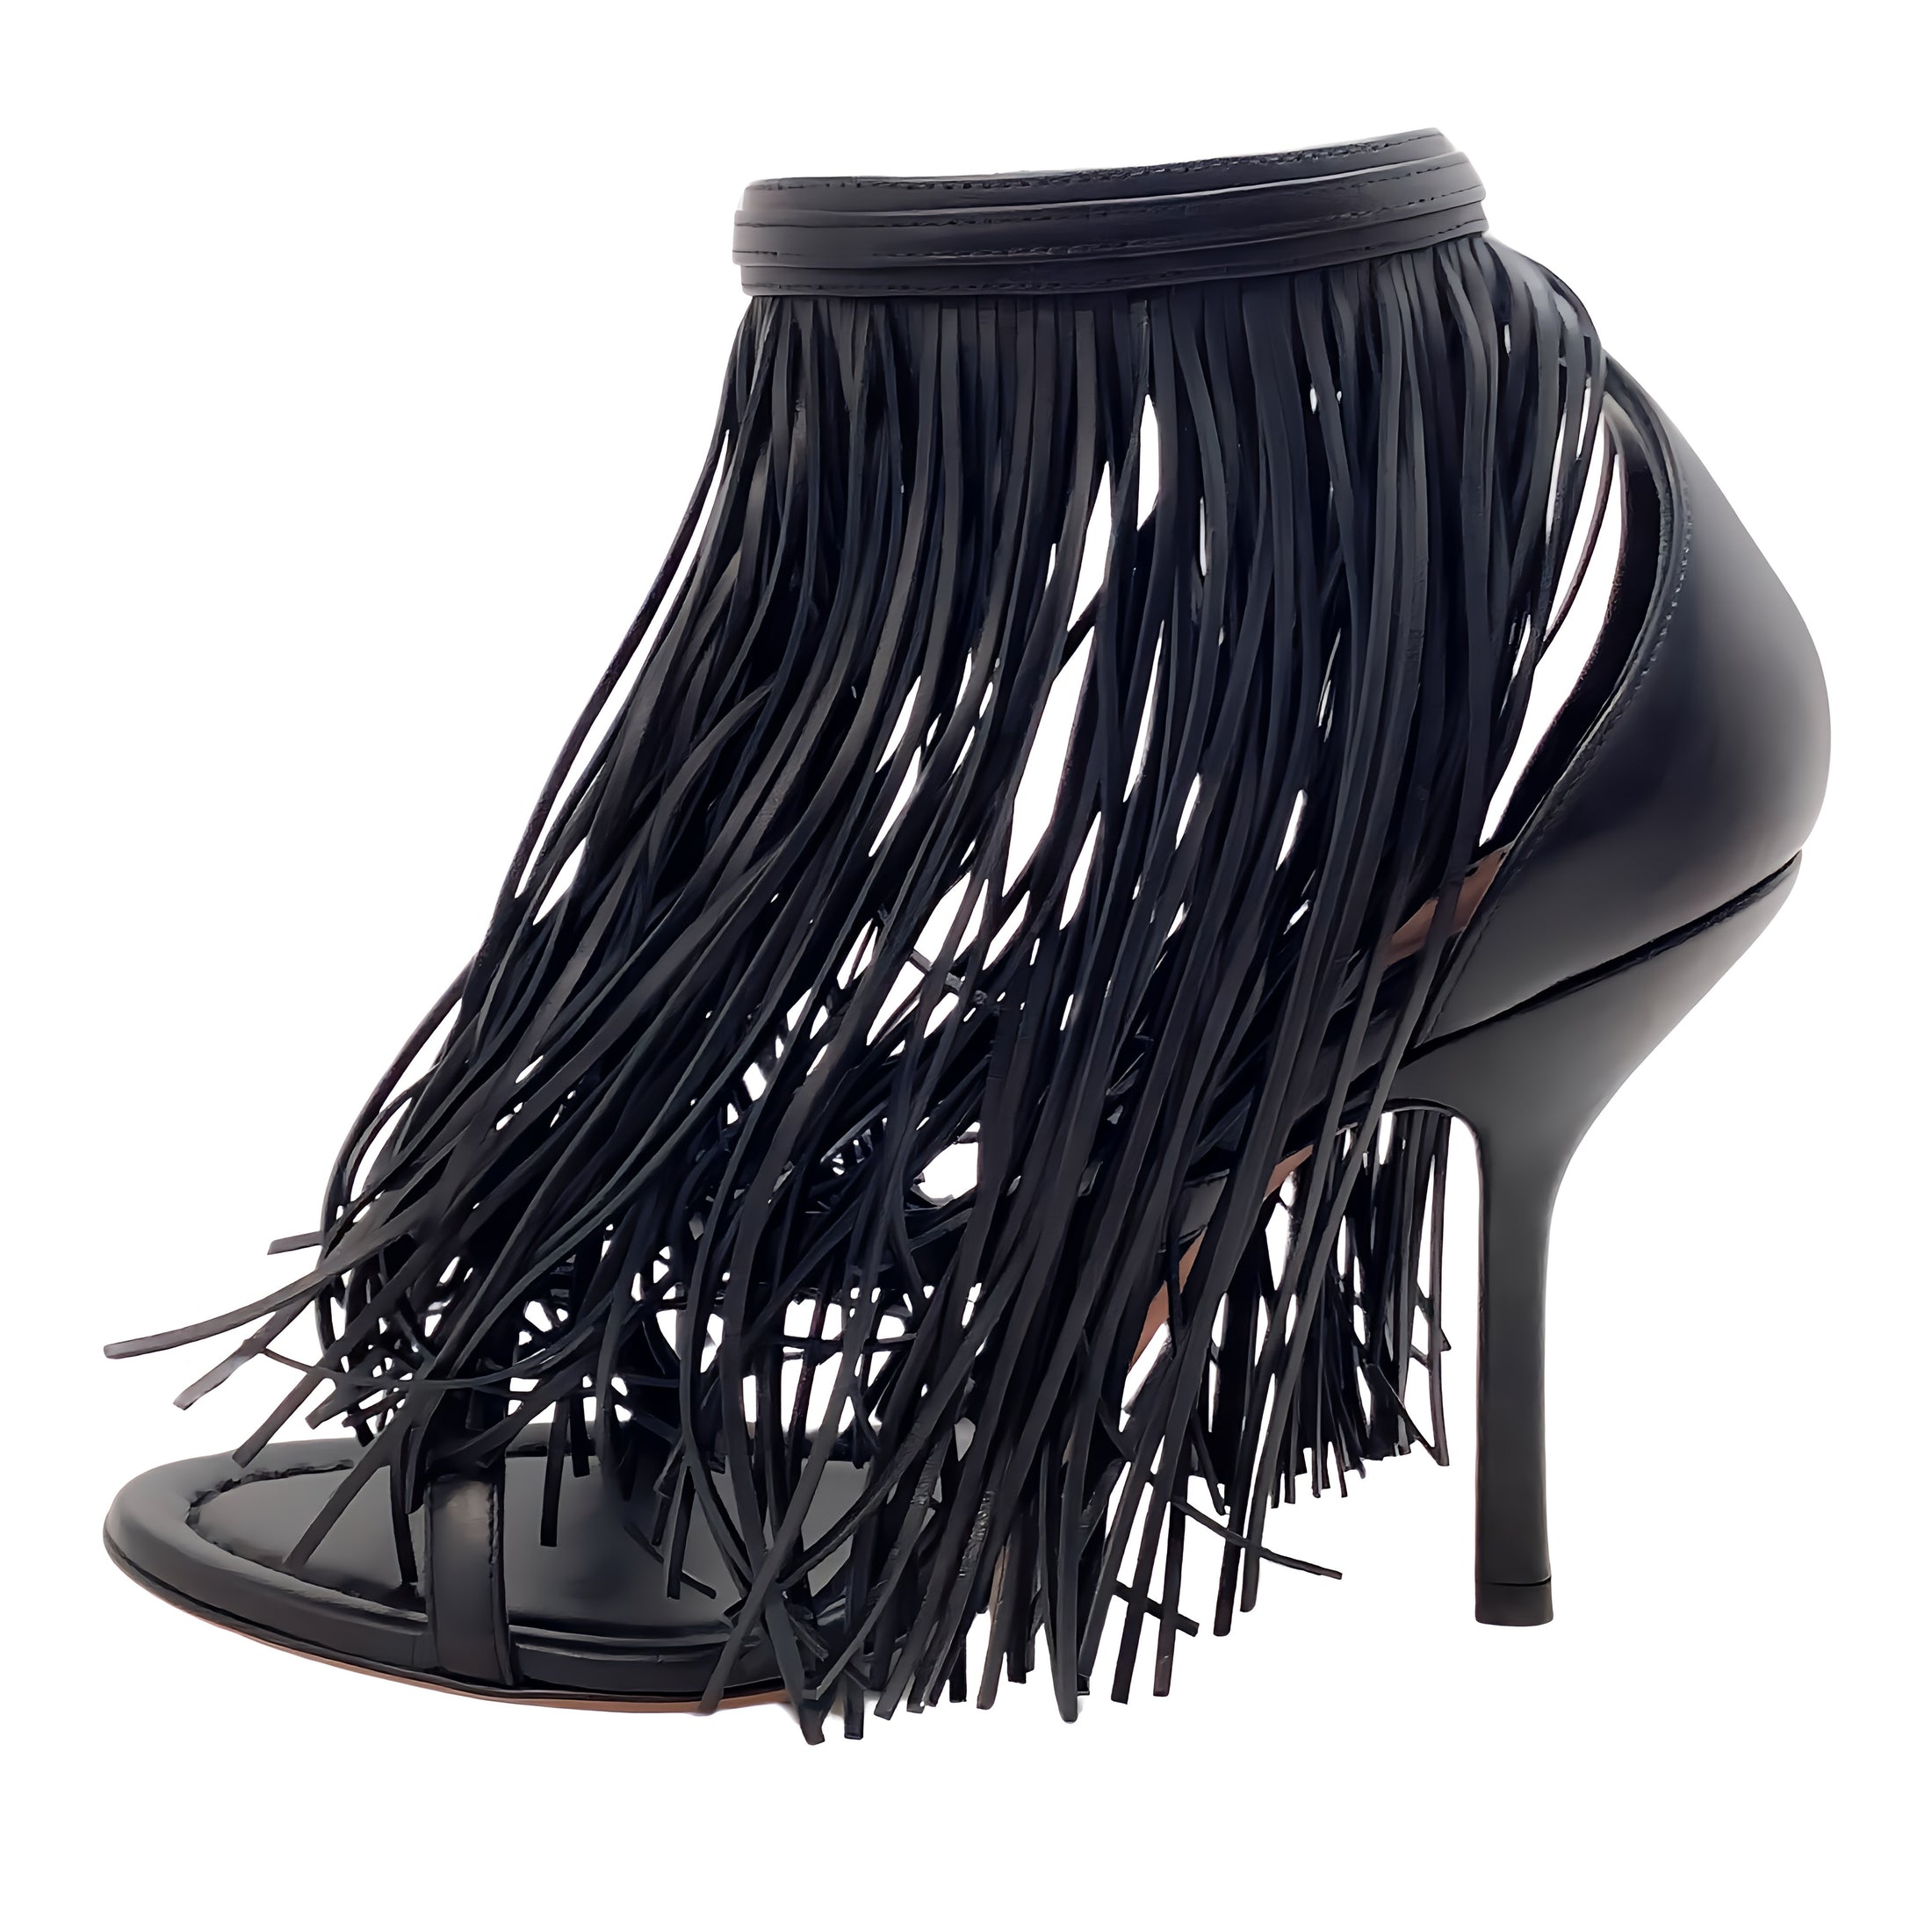 Alaia Black Leather Maxi Fringe Sandals with Ankle Strap